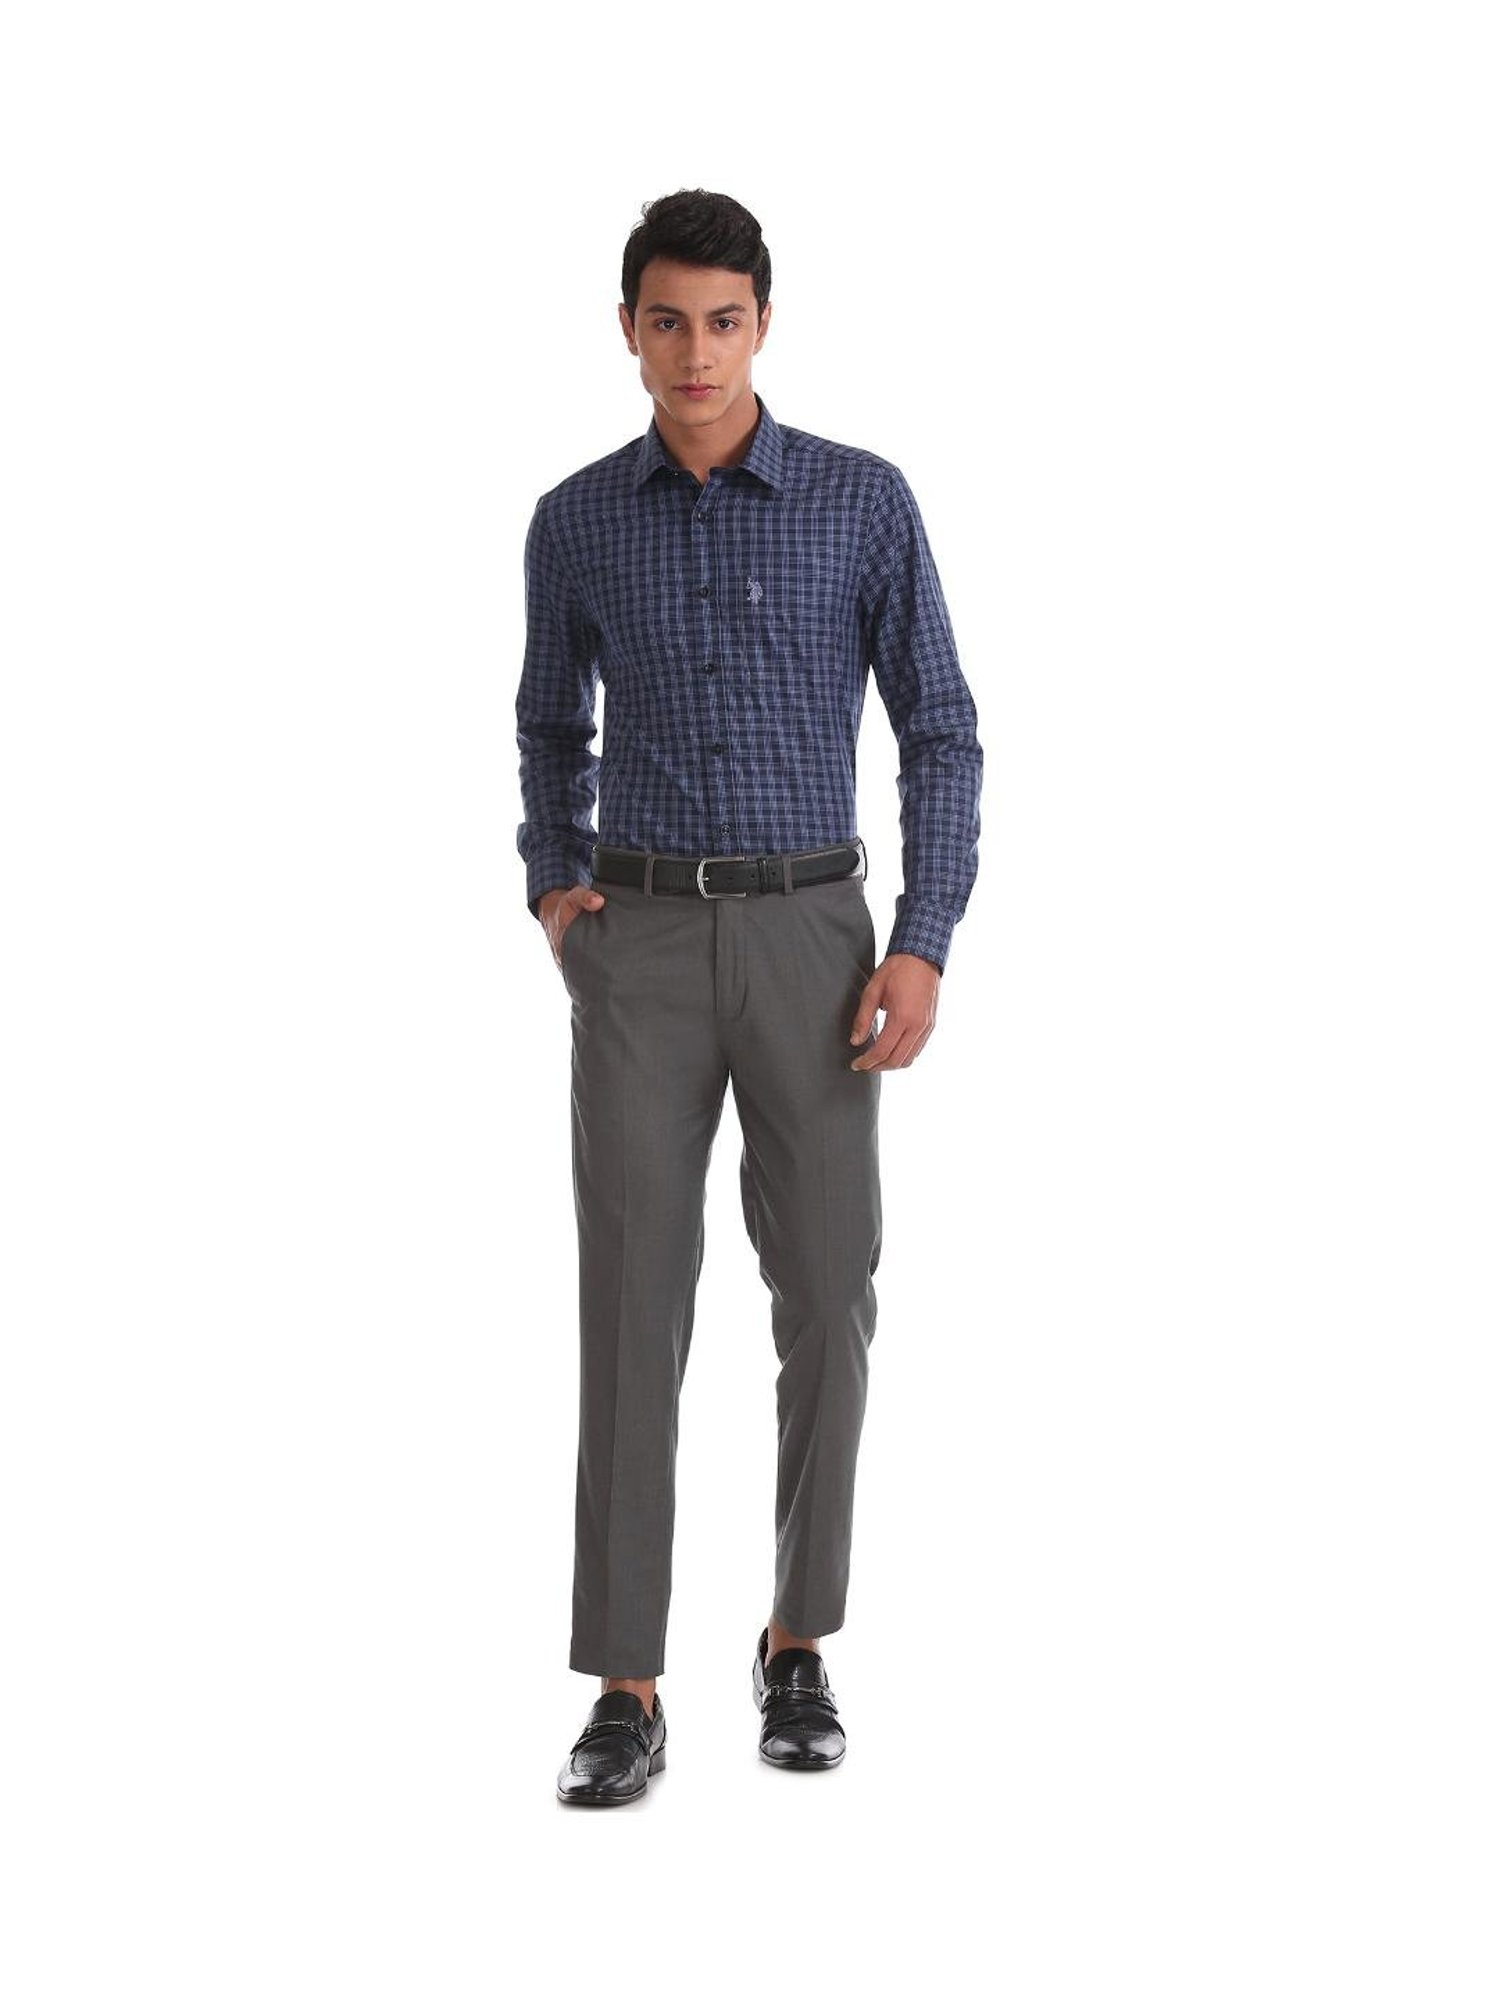 Us Polo Assn Linen Trousers  Buy Us Polo Assn Linen Trousers online in  India